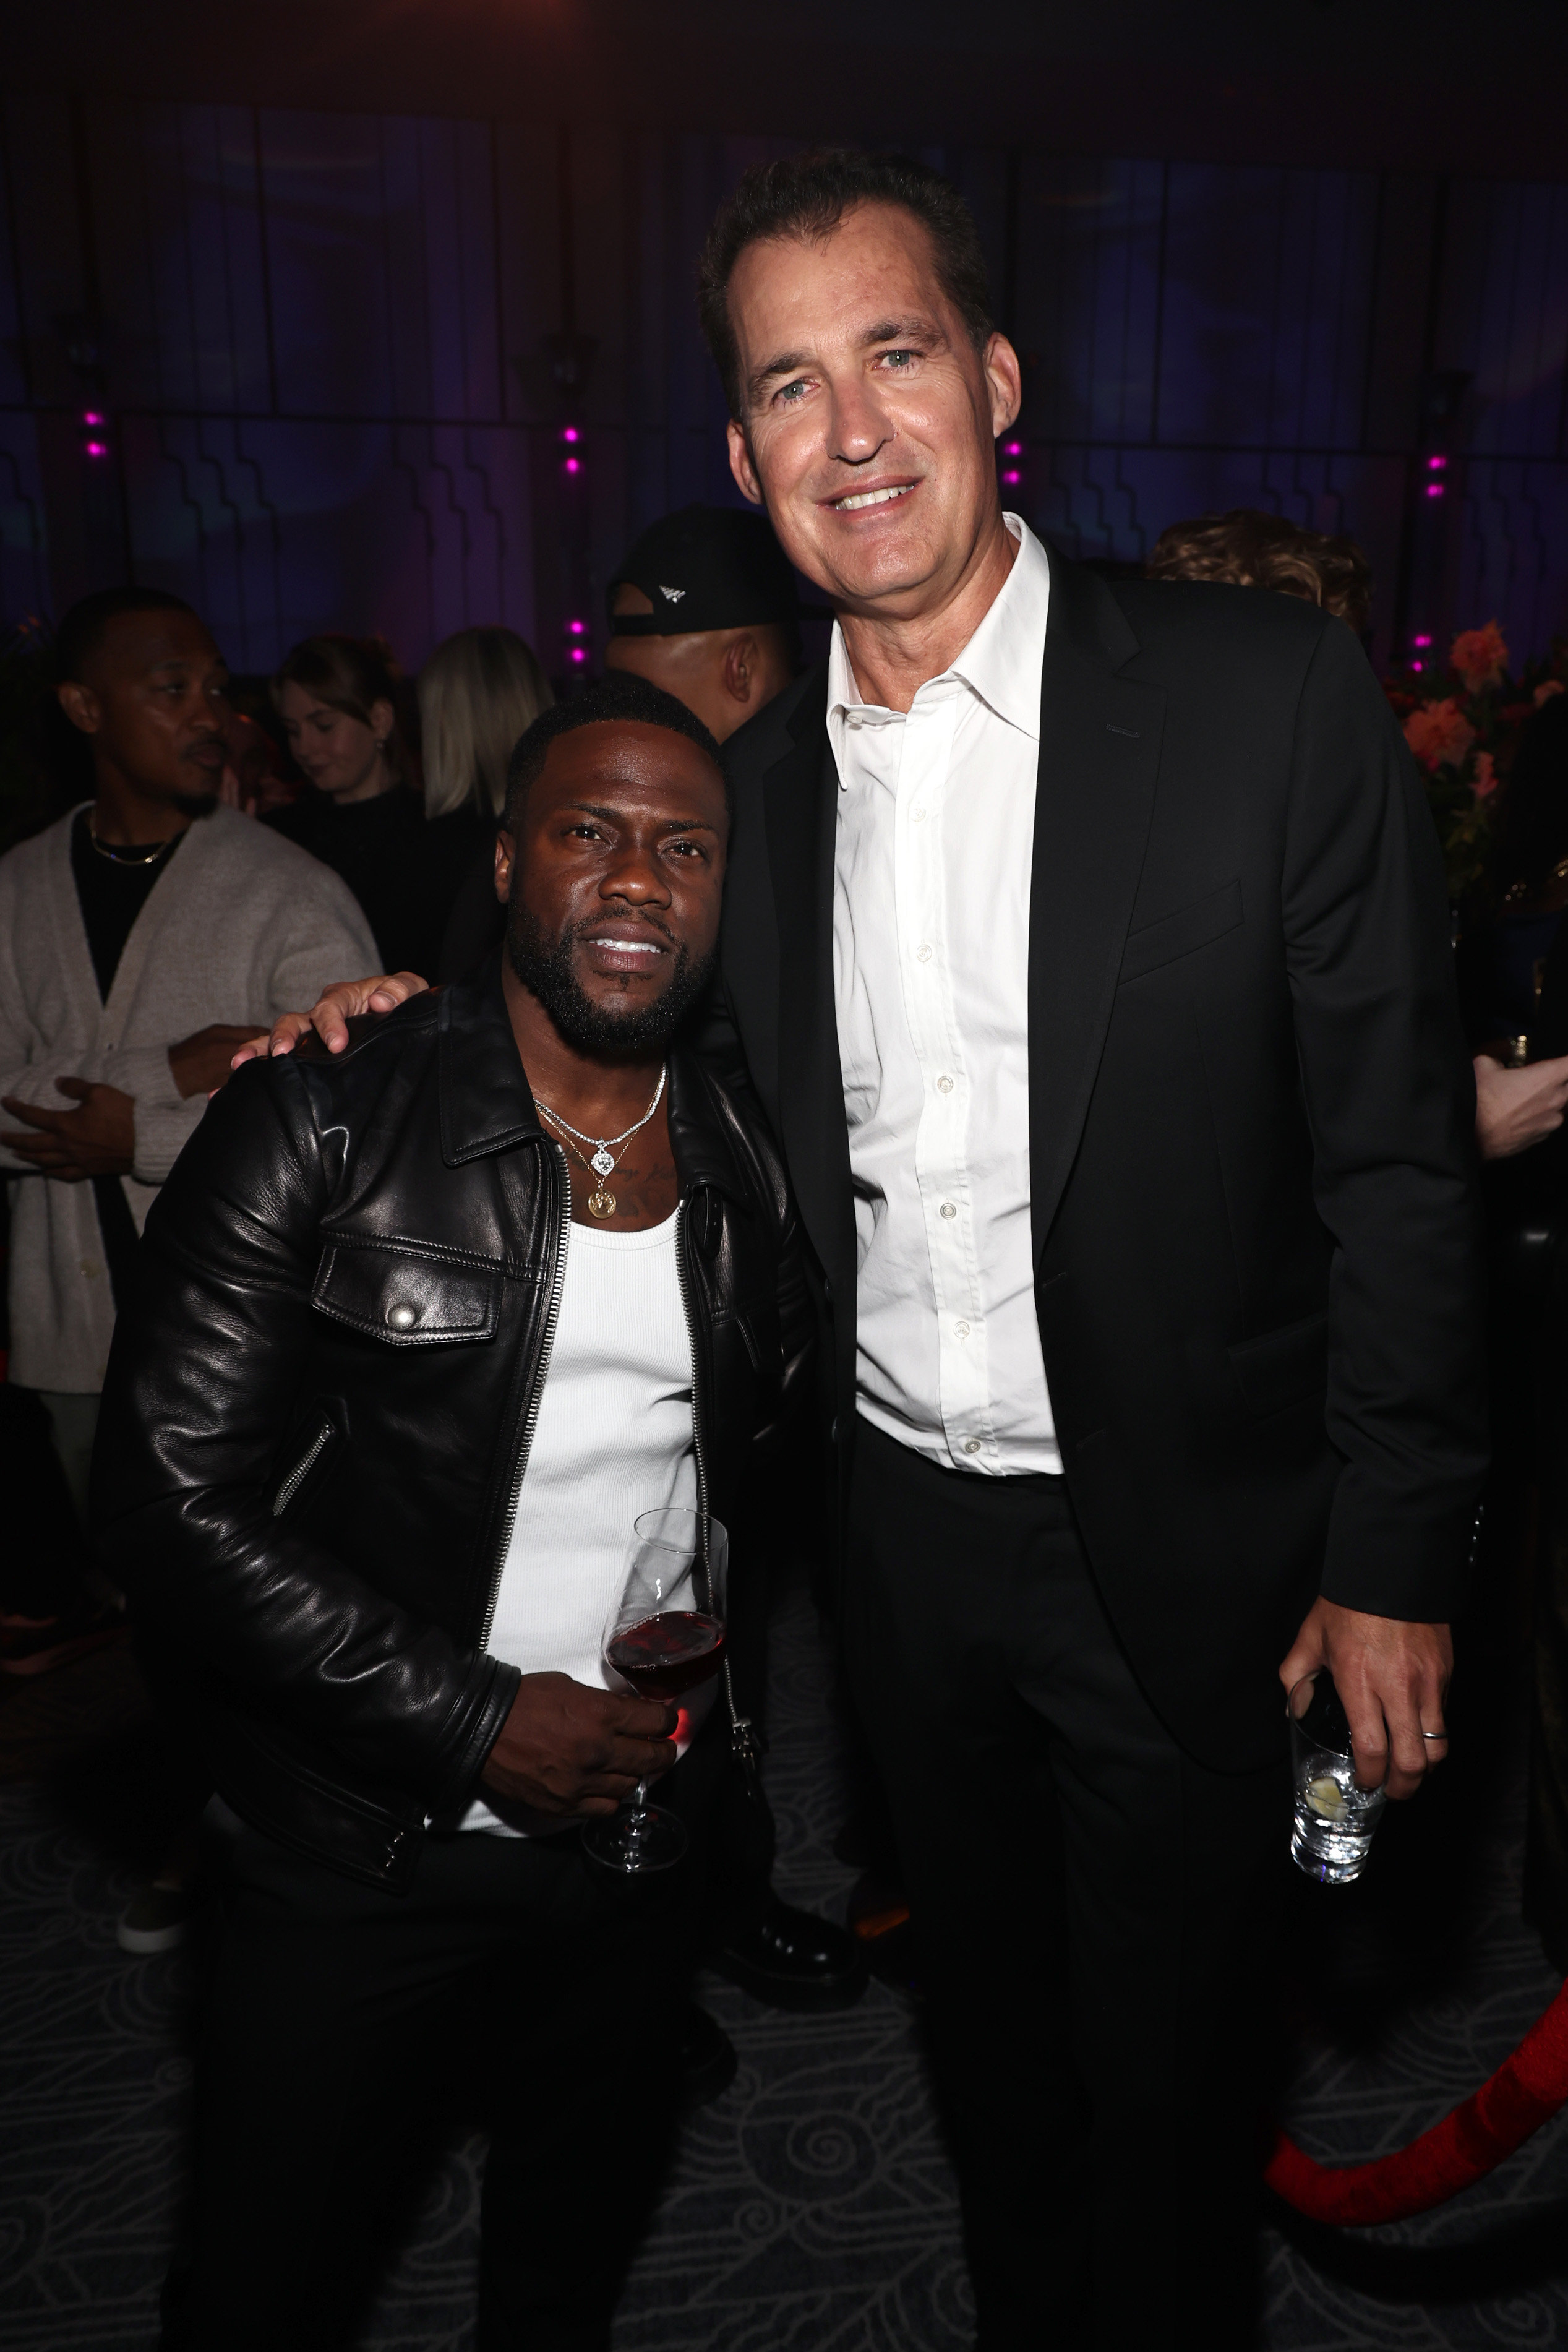 Kevin Hart with another gentleman